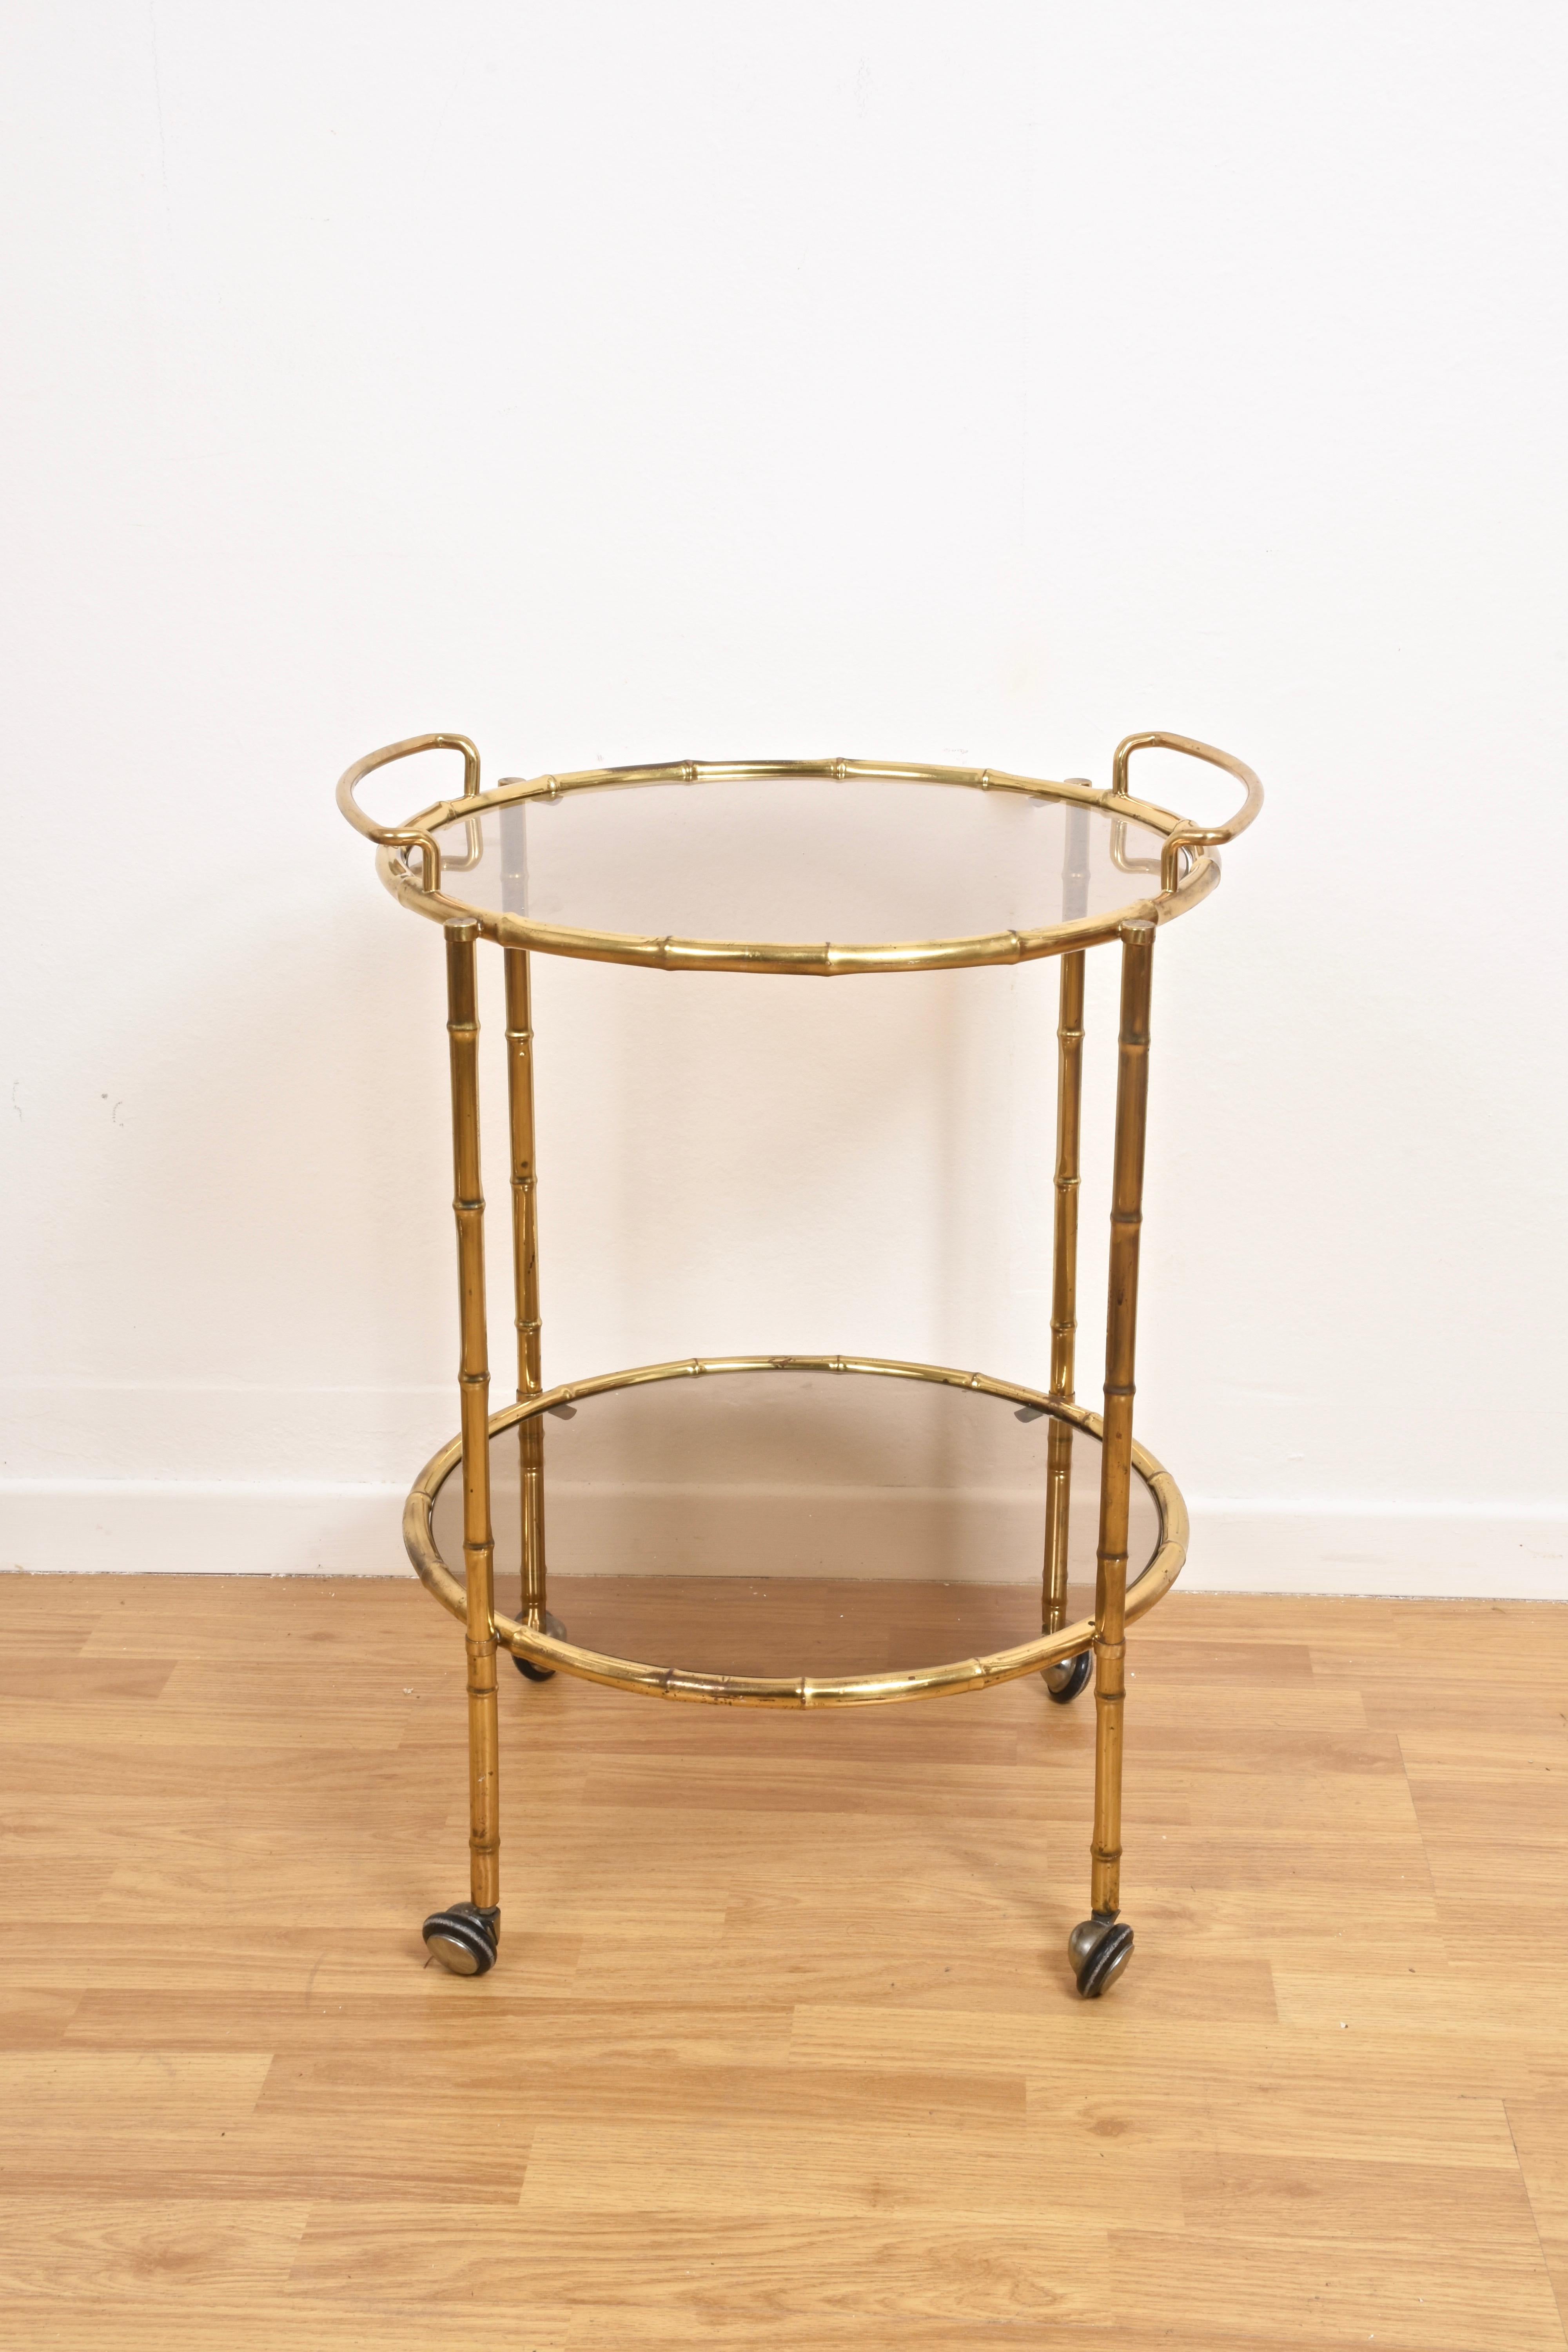 Magnificent midcentury brass faux bamboo serving bar cart. This serving trolley was produced by Maison Jansen in France during 1970s.

This piece is unique as the structure is made in brass shaped like bamboo (faux bamboo). This amazing piece is